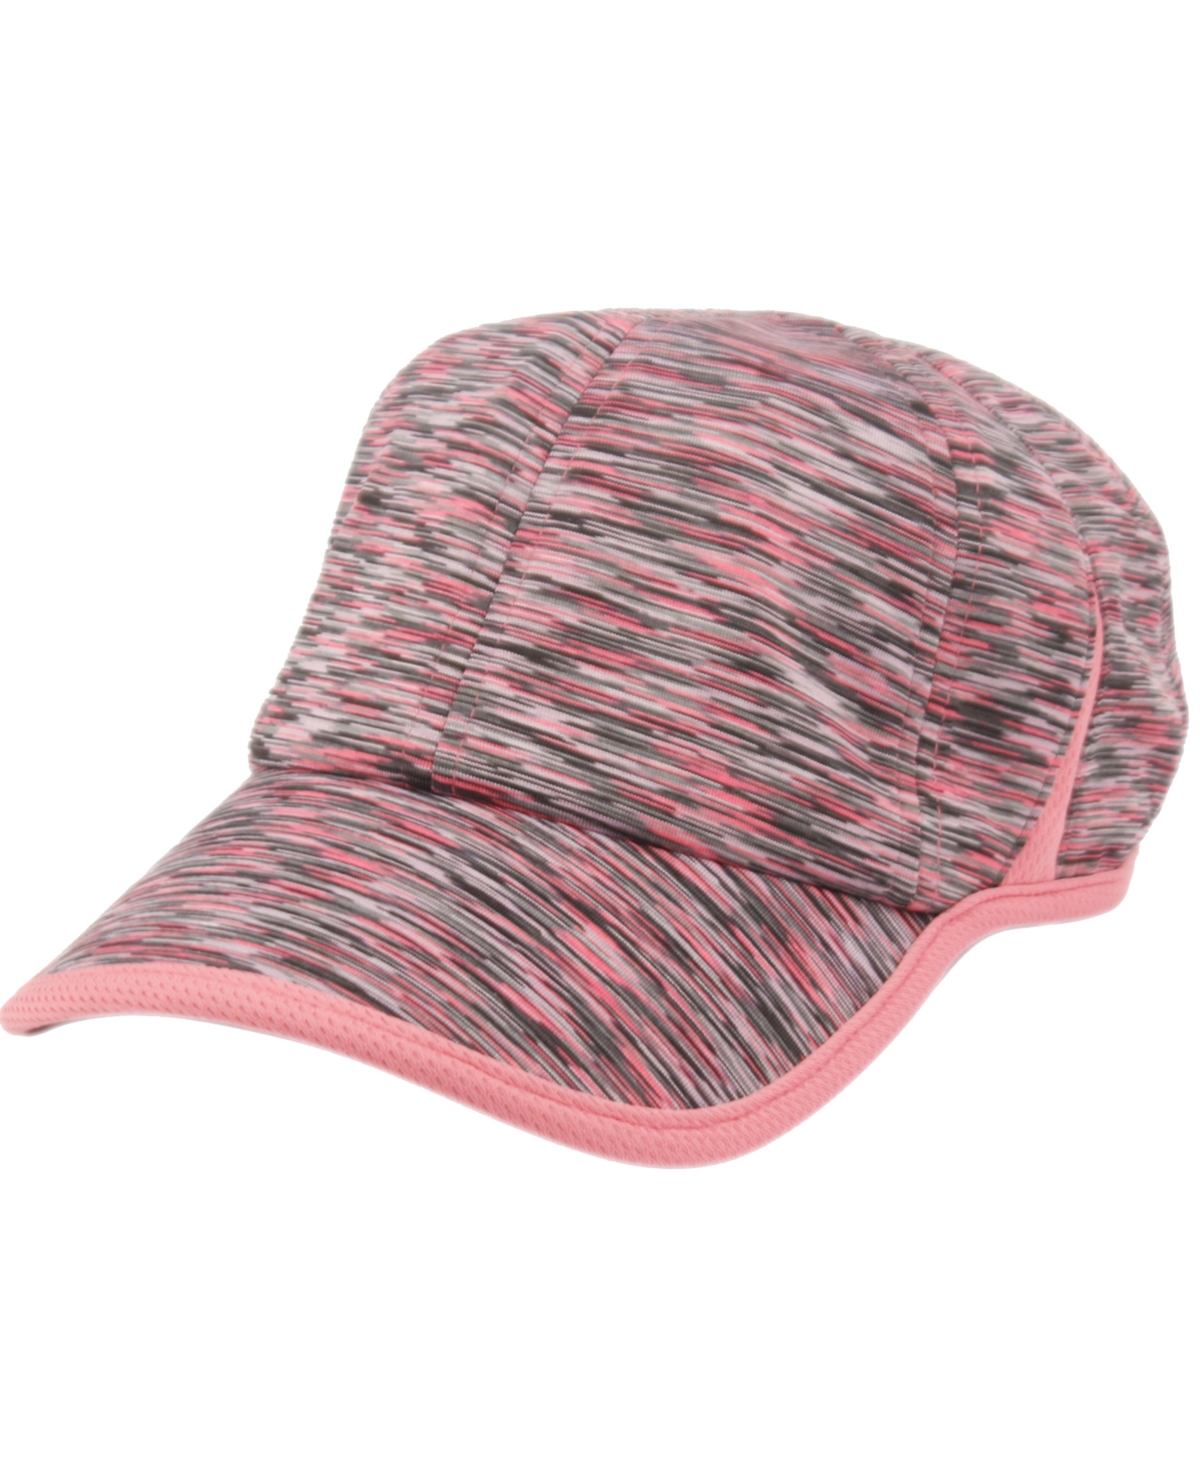 Angela & William Women's Ponytail Messy Buns Yoga Ponycap With Zipper Opening In Pink